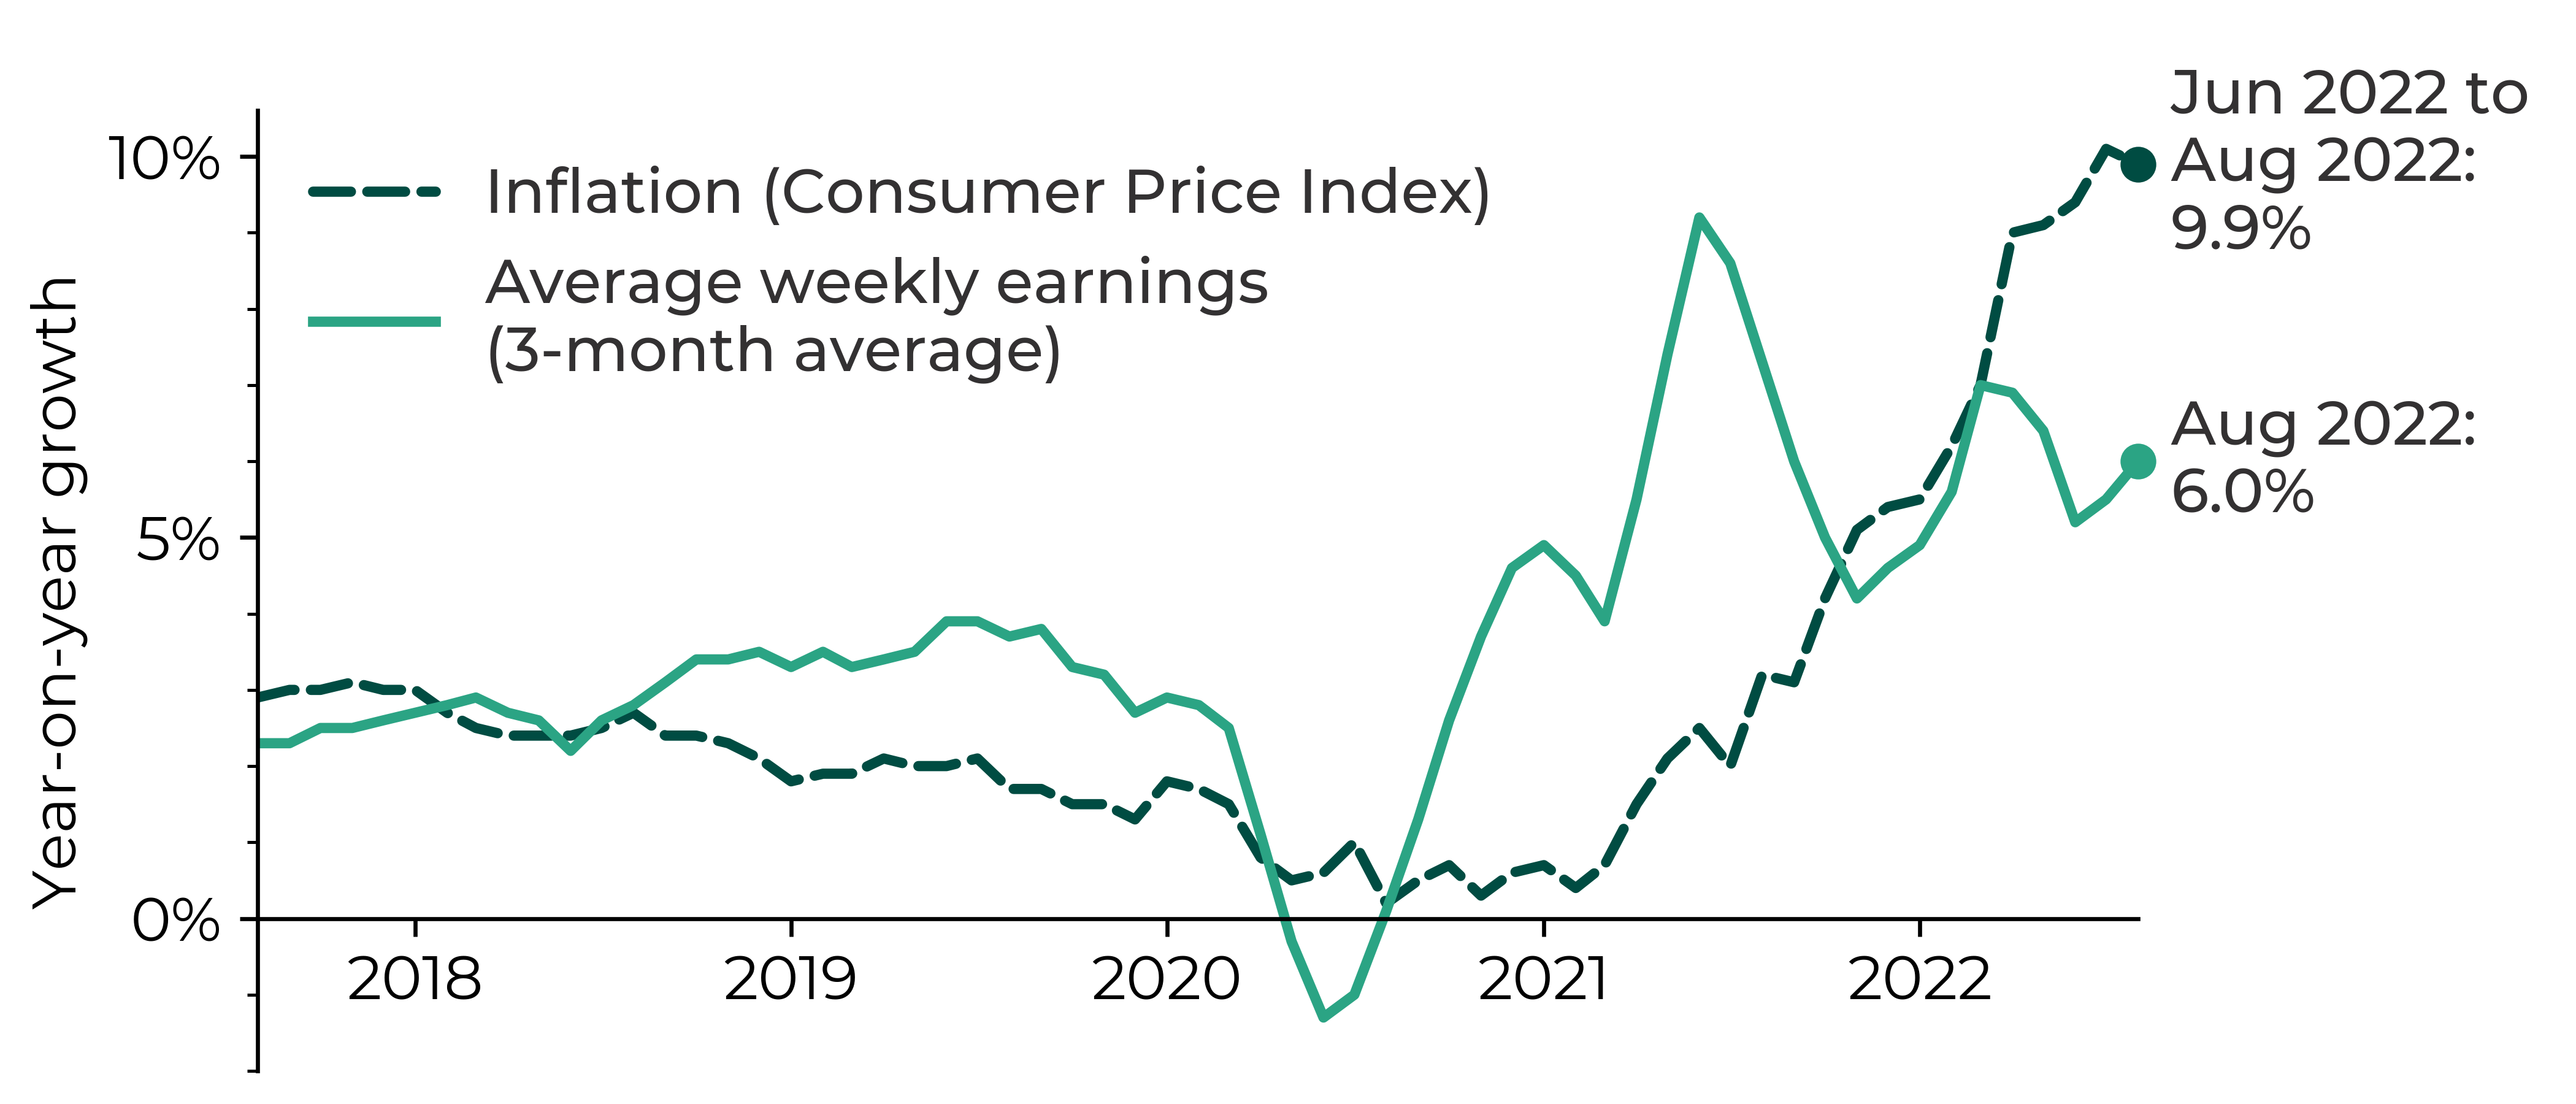 Graph showing UK inflation exceeding average weekly earnings (3-month average) in 2022. In August 2022, the average weekly earnings were 6.0% higher than for August 2021 whereas the Consumer Price Index inflation was at 9.9%.